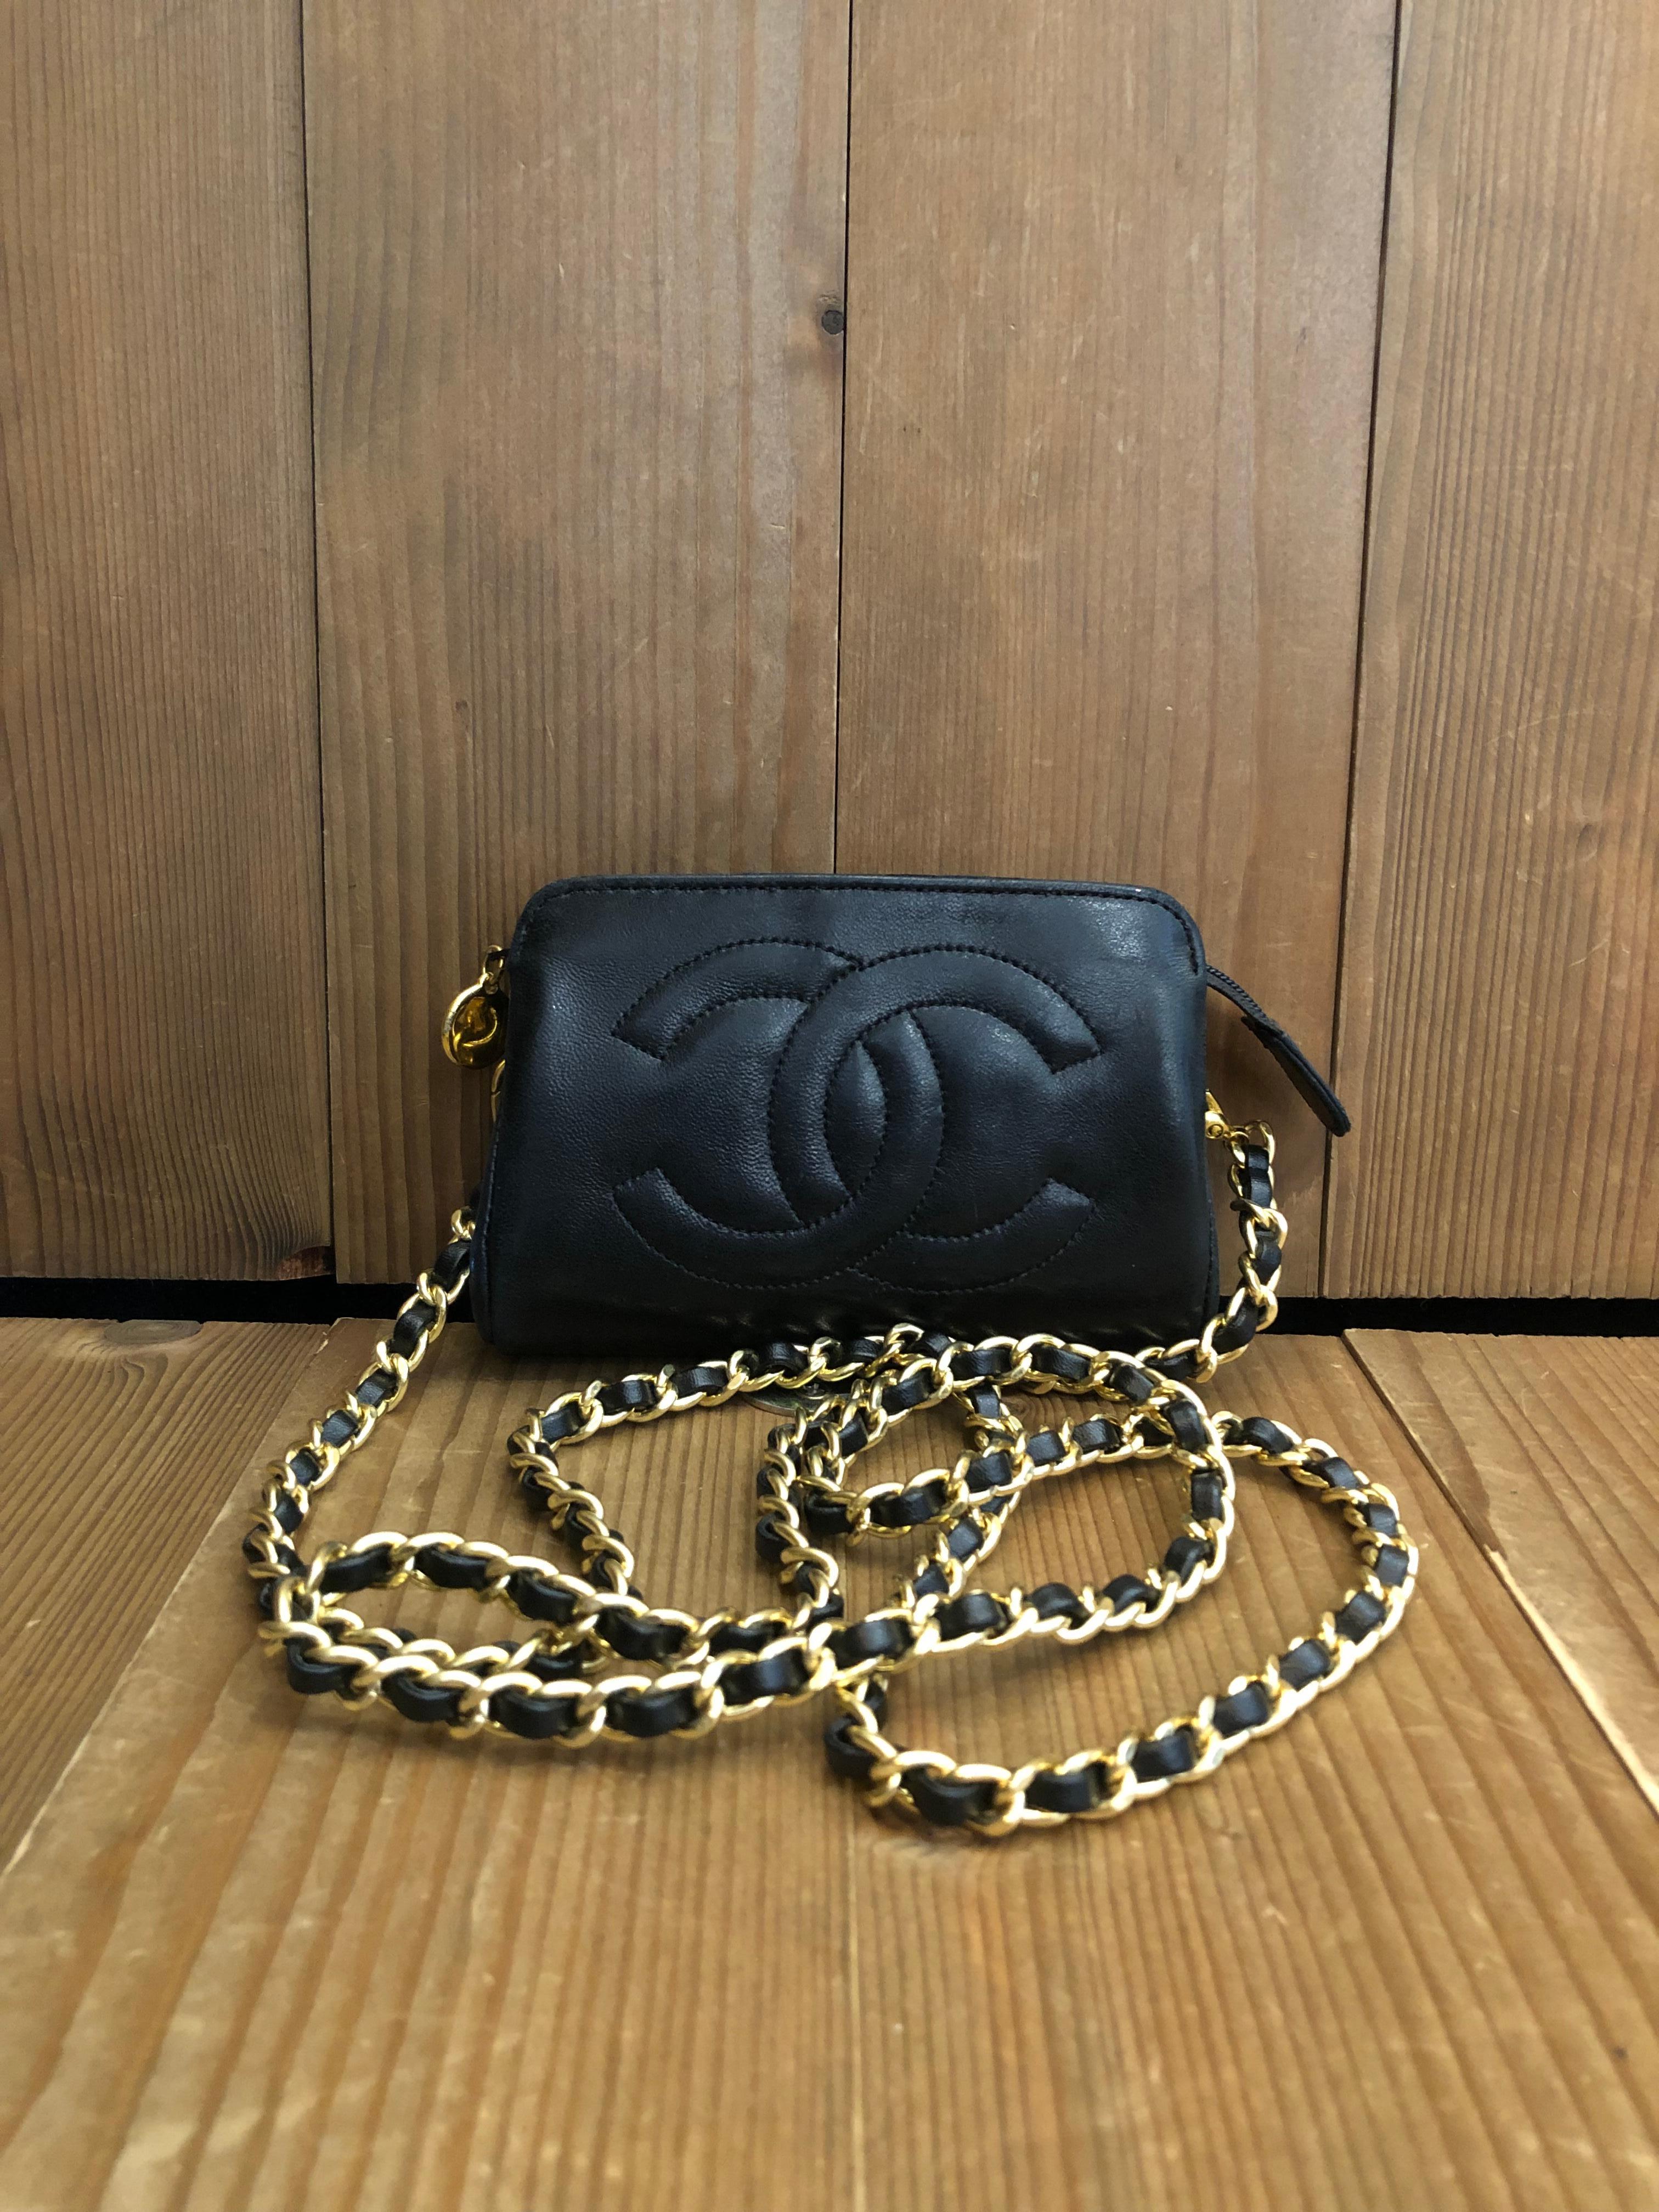 Women's or Men's Vintage CHANEL Mini Lambskin Leather Pouch Bag Black (Altered)